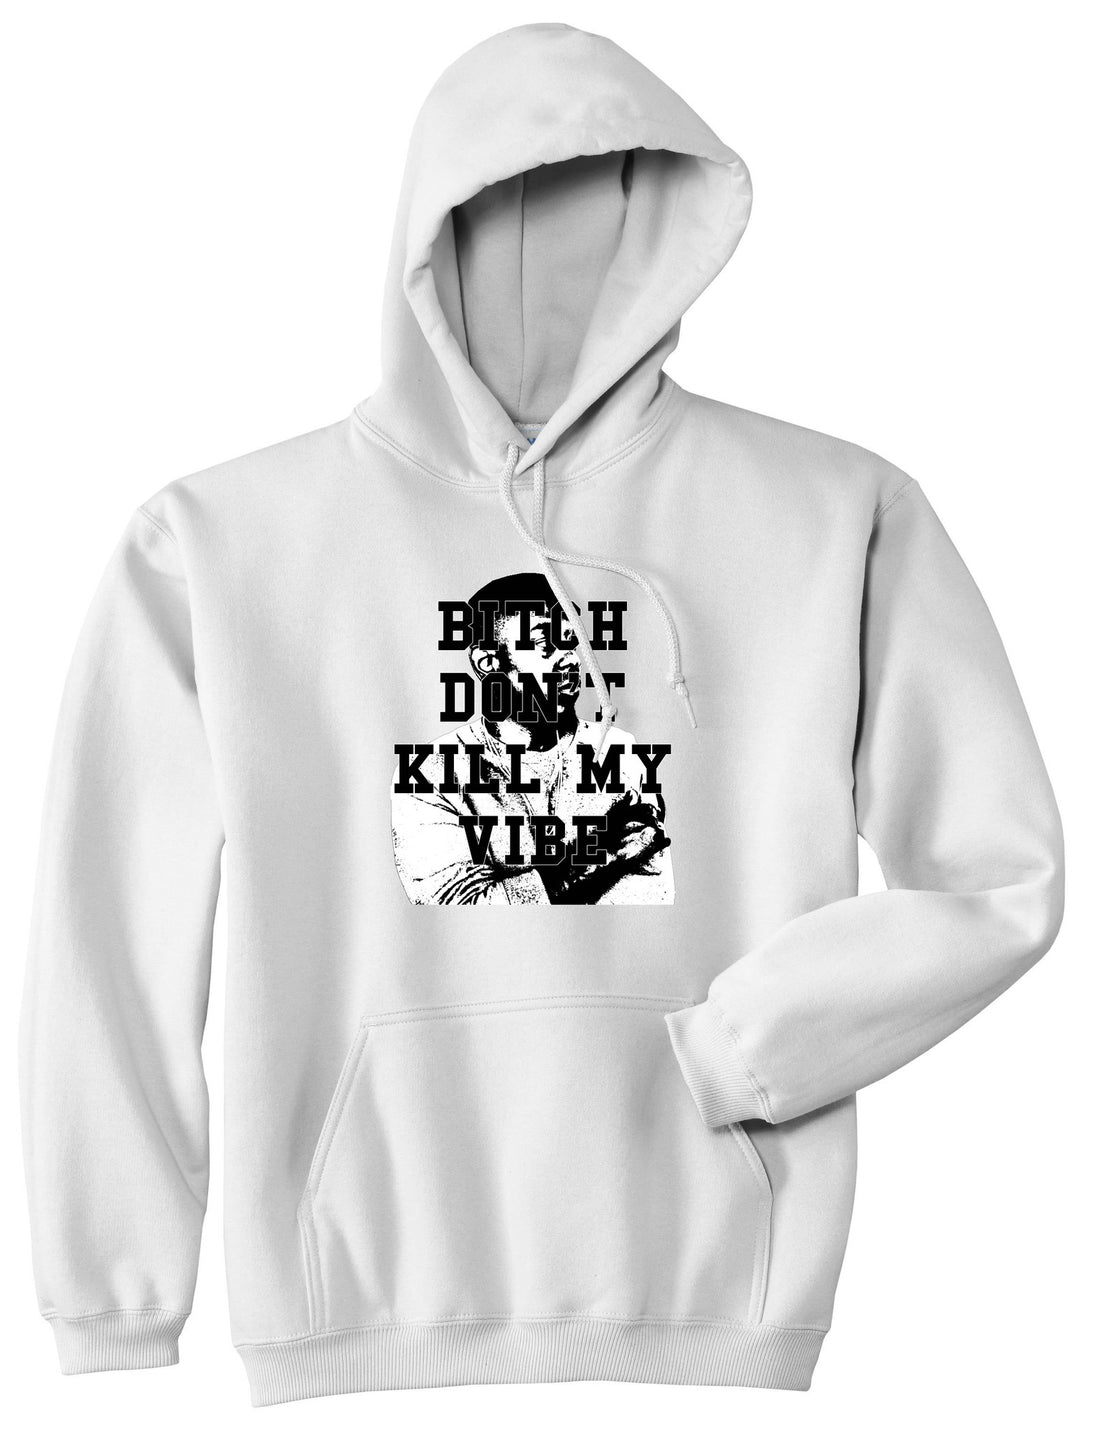 Bitch Dont Kill My Vibe Kendrick Boys Kids Pullover Hoodie Hoody in White by Kings Of NY